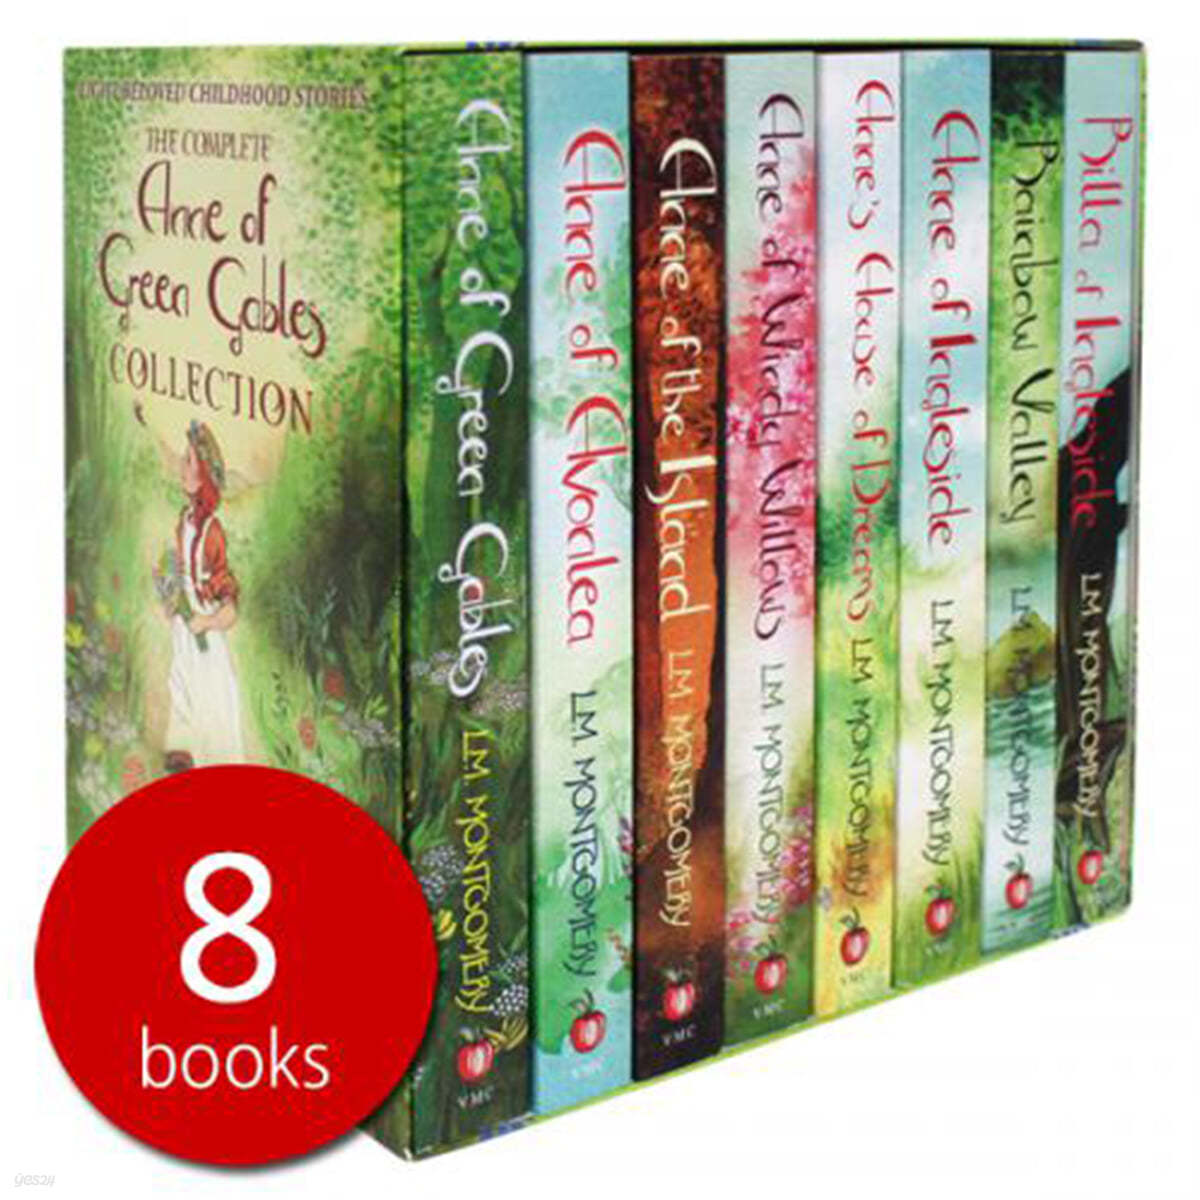 Complete Anne of Green Gables 8 Books Collection Box Set (Paperback 8권)